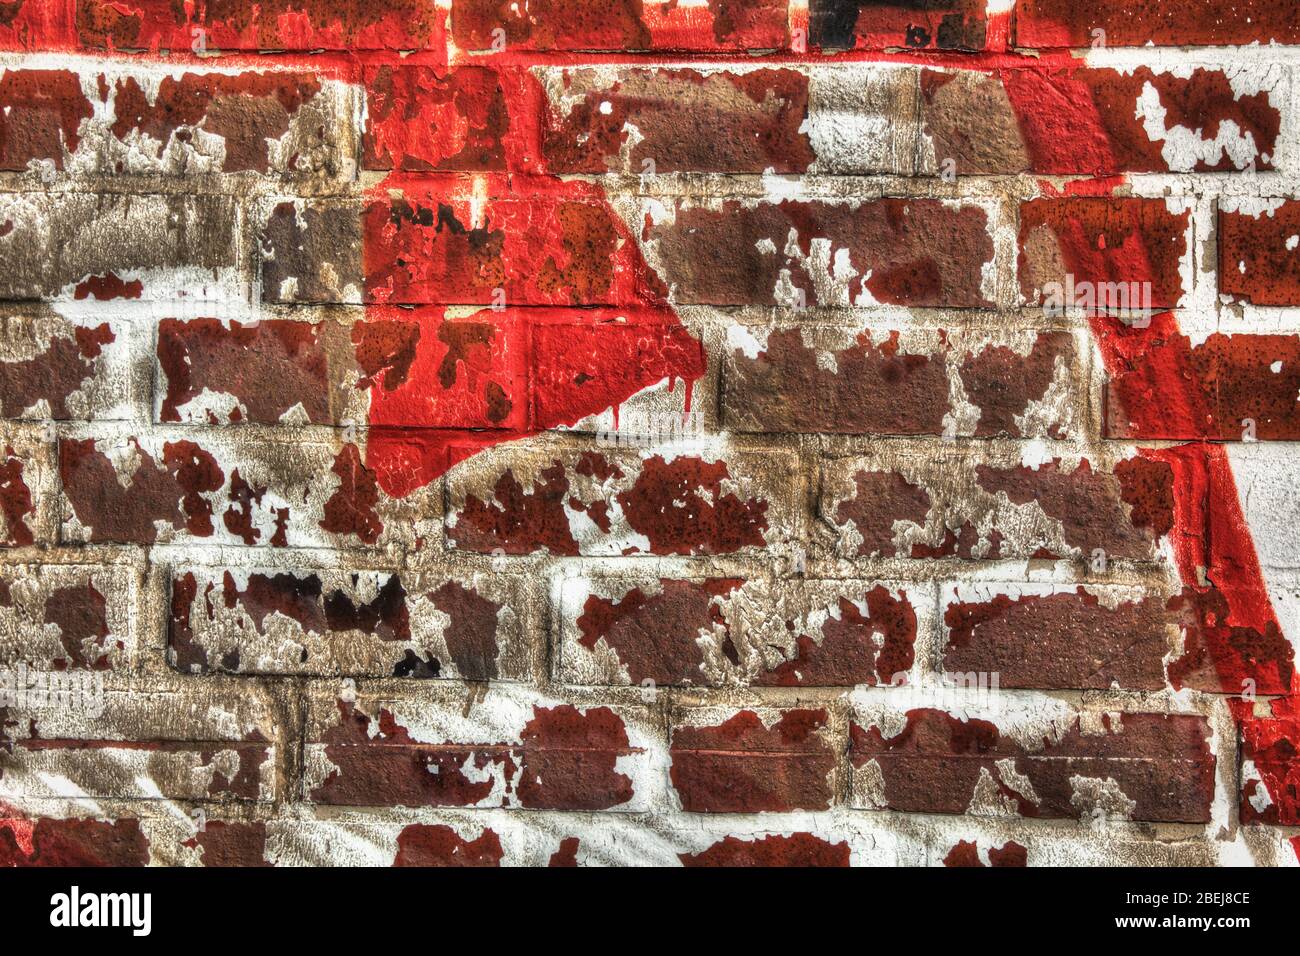 Wall of red bricks with rest of white color. Stock Photo